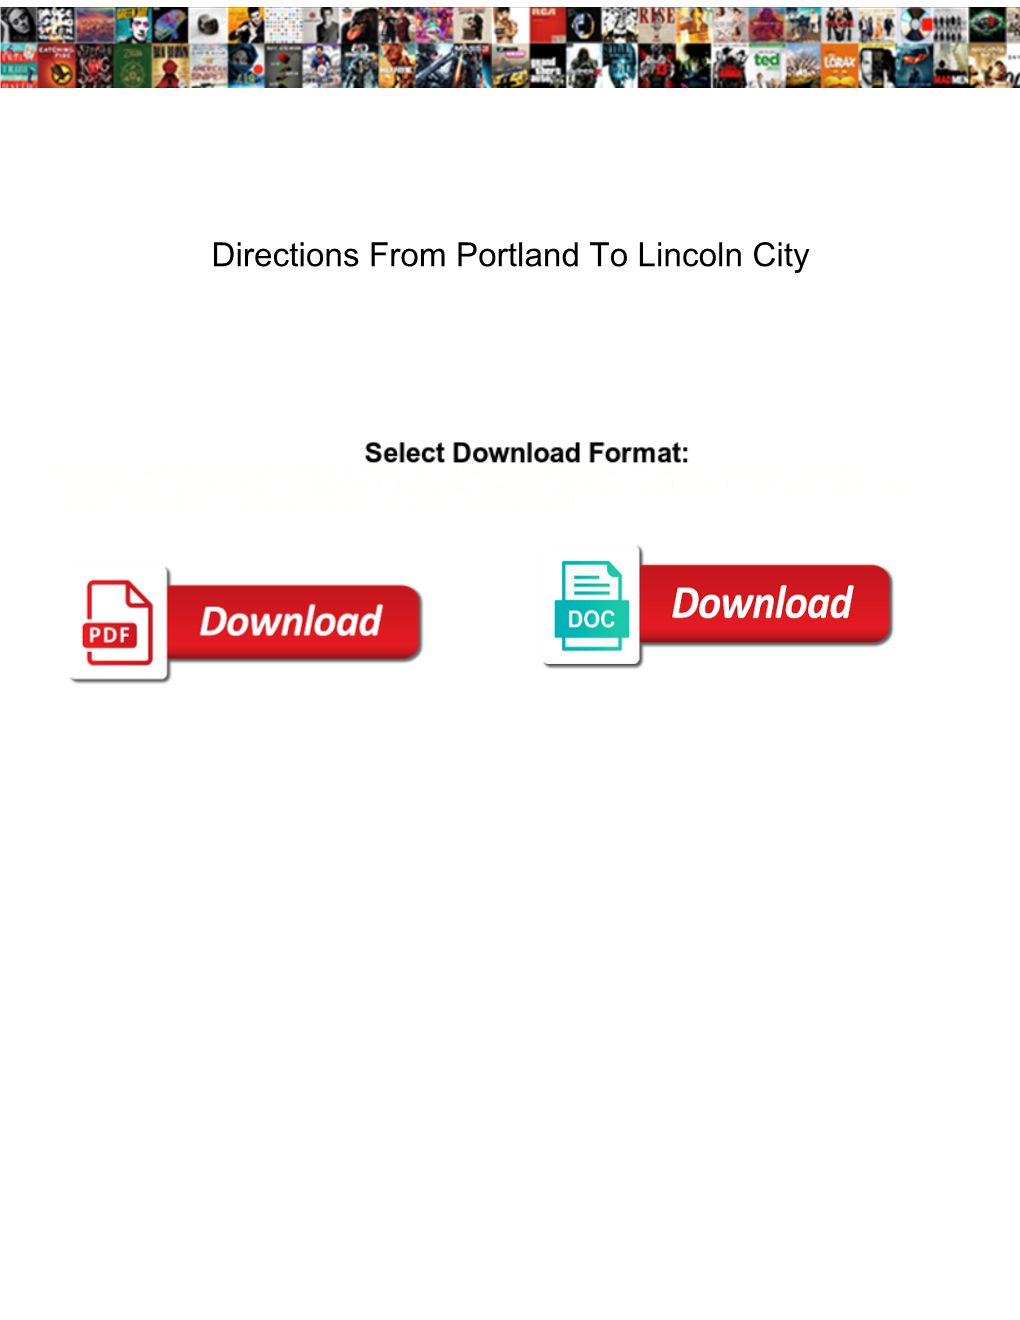 Directions from Portland to Lincoln City